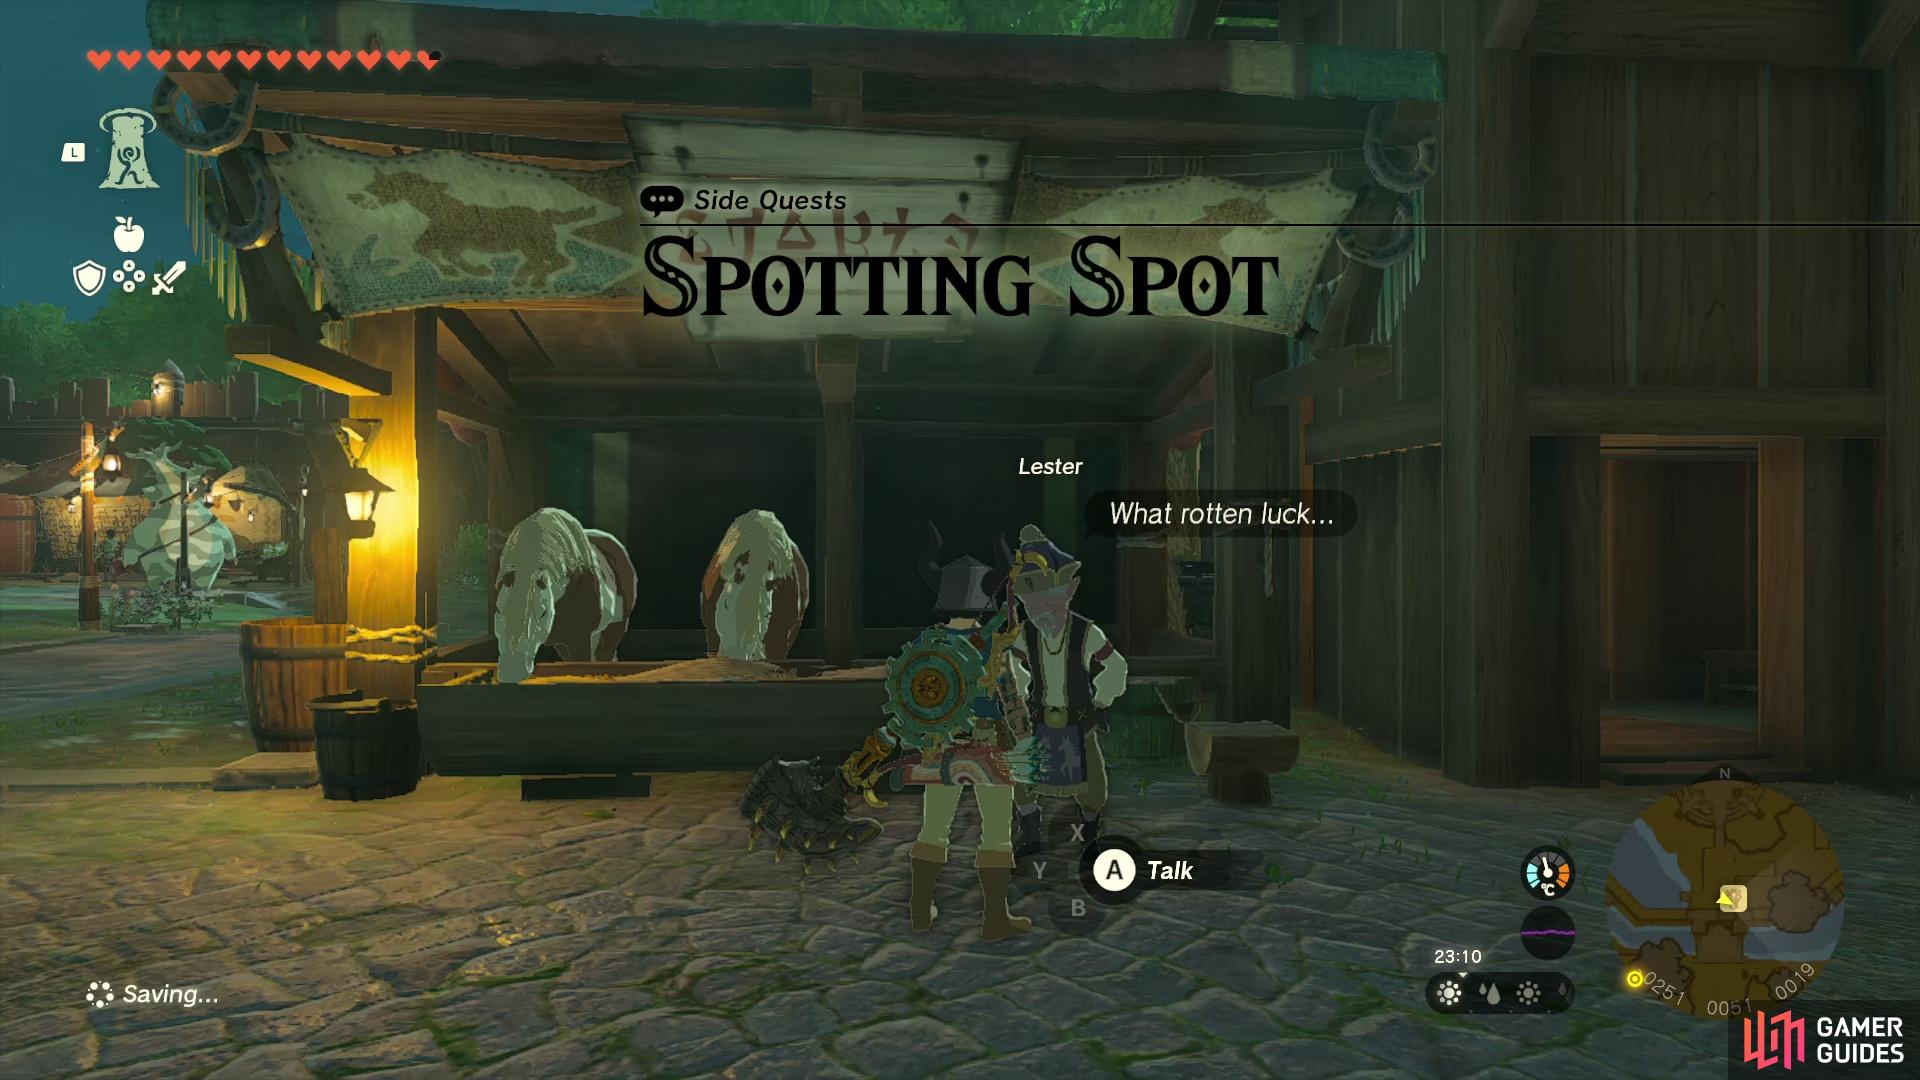 Spotting Spot is a follow-up to the Incomplete Stable Side Quest in Tears of the Kingdom.